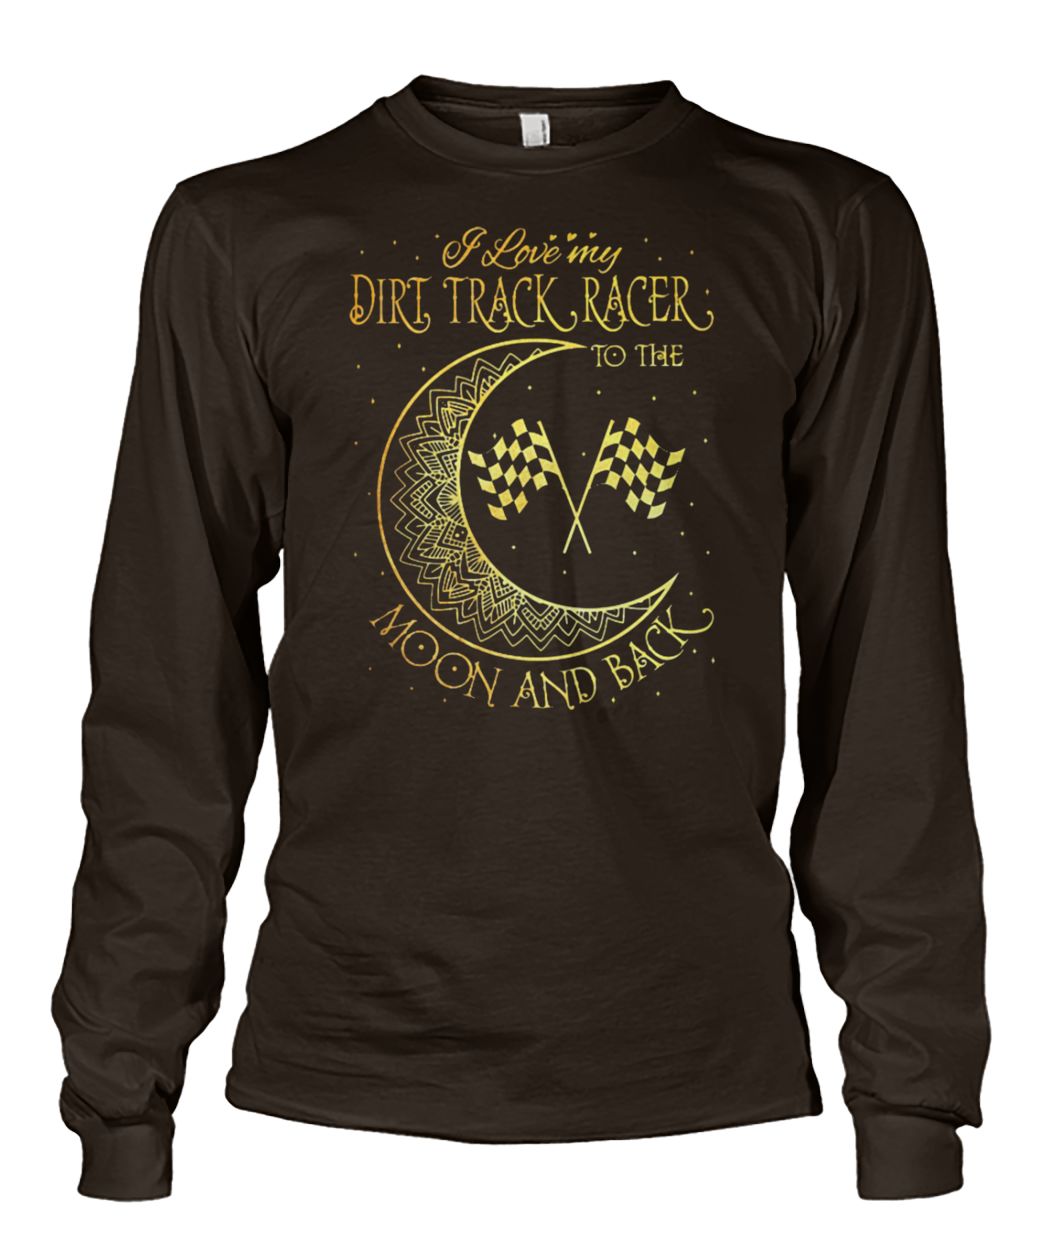 I love my dirt track racer to the moon and back unisex long sleeve